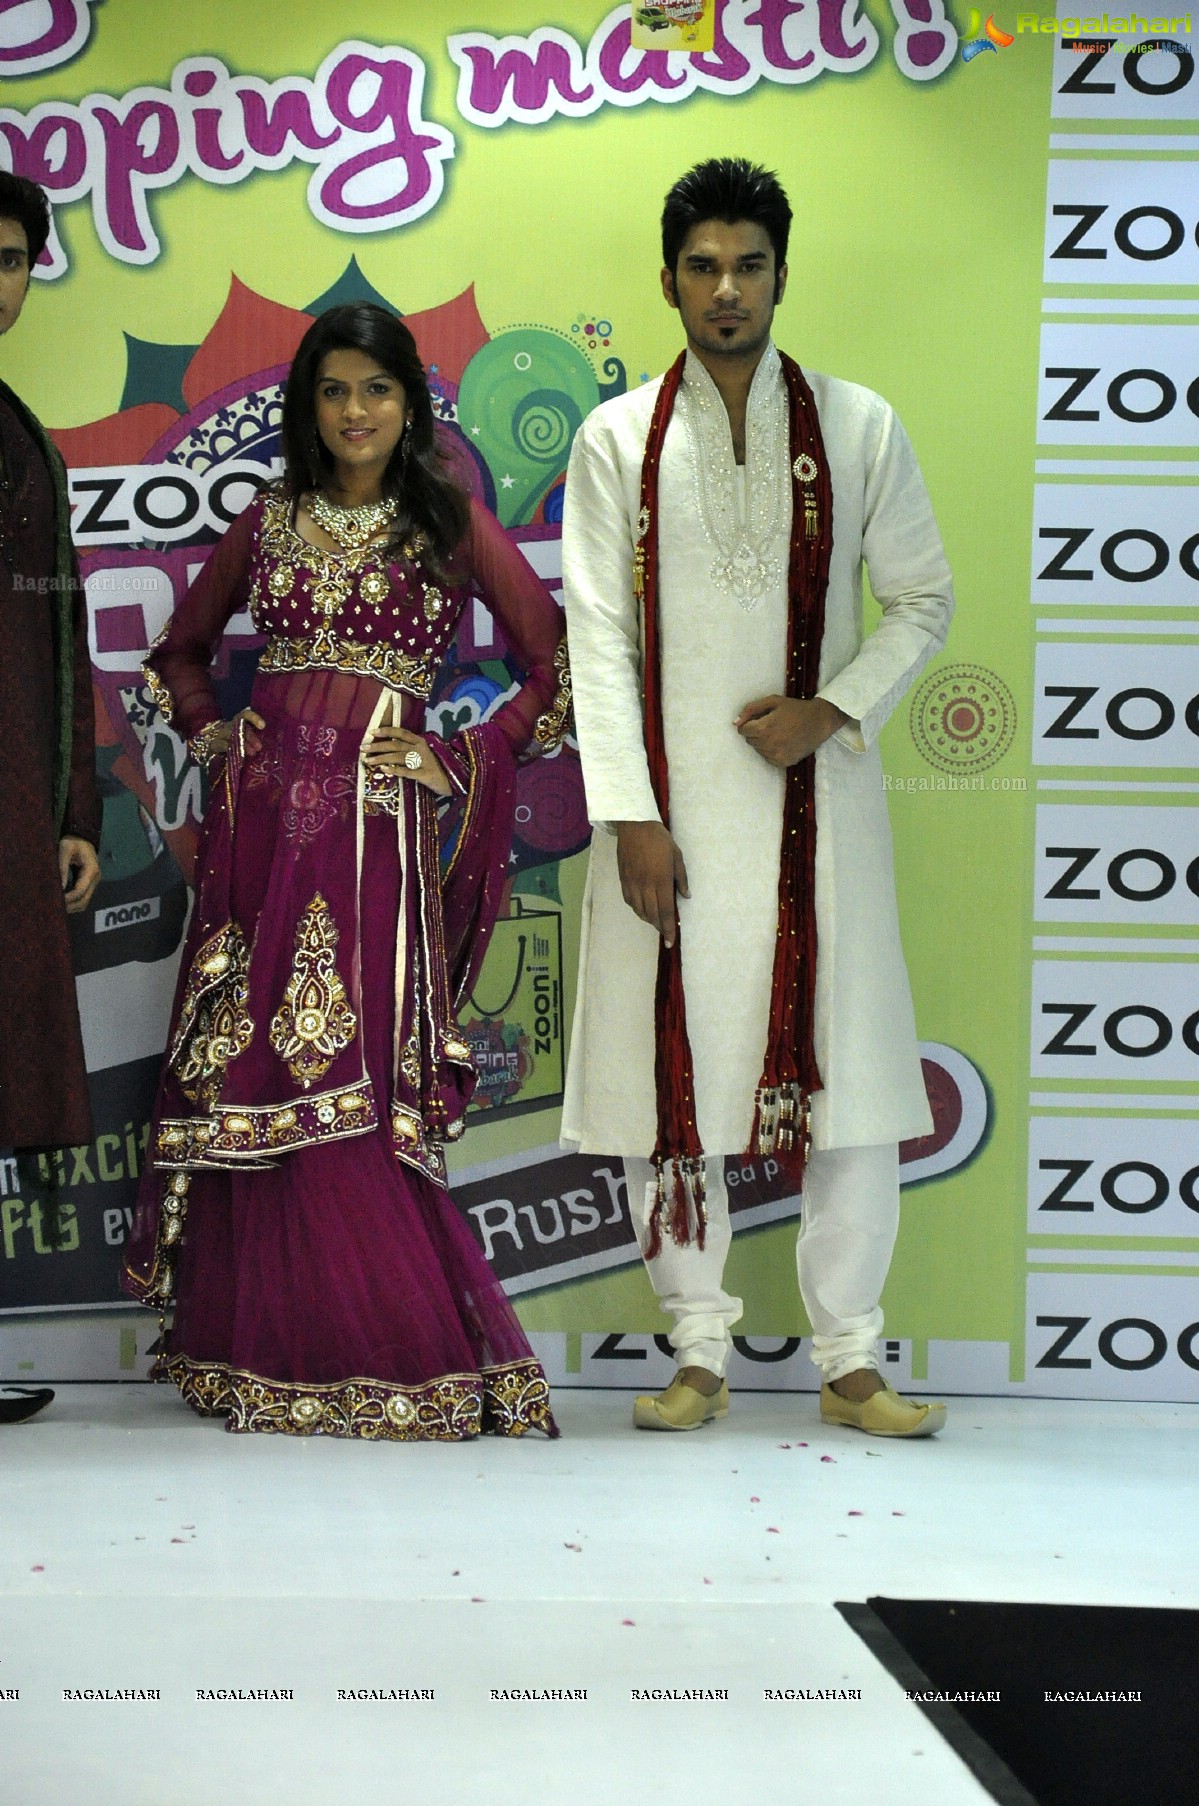 Zooni Centre Designer Collection Launch